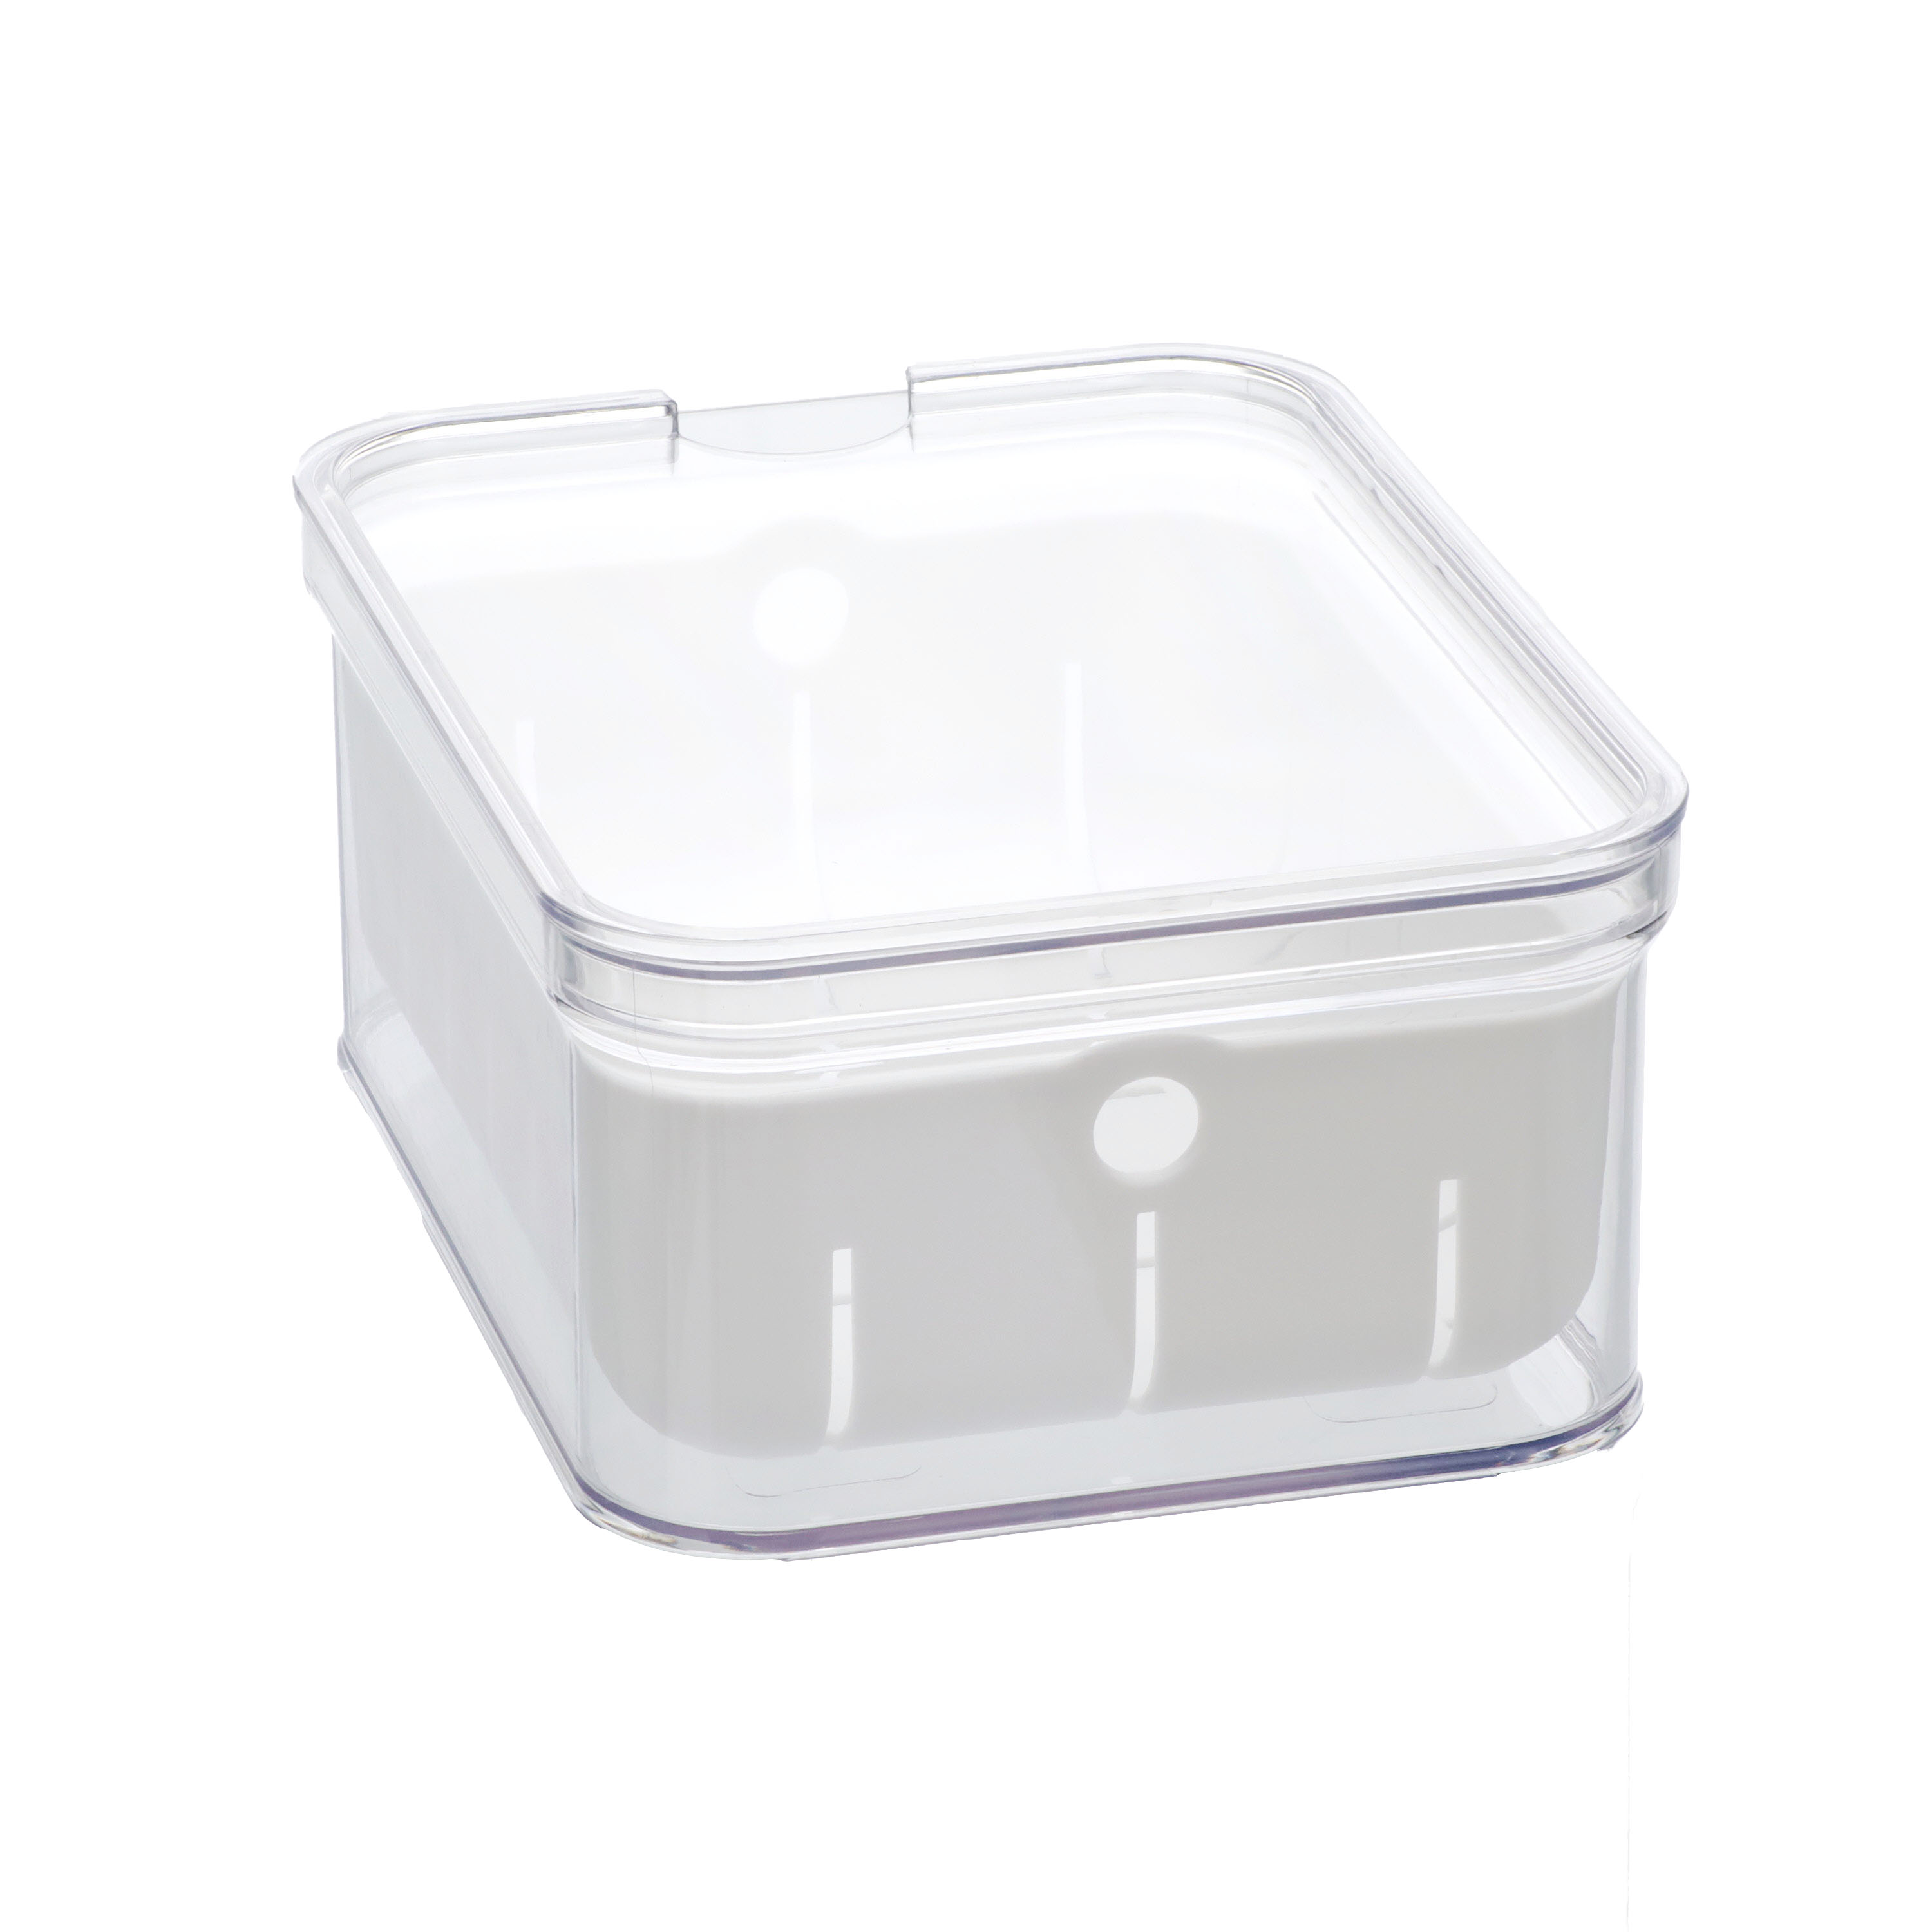 RECTANGULAR Clear Plastic Quality Containers Tubs with Lids Microwave Food Safe 